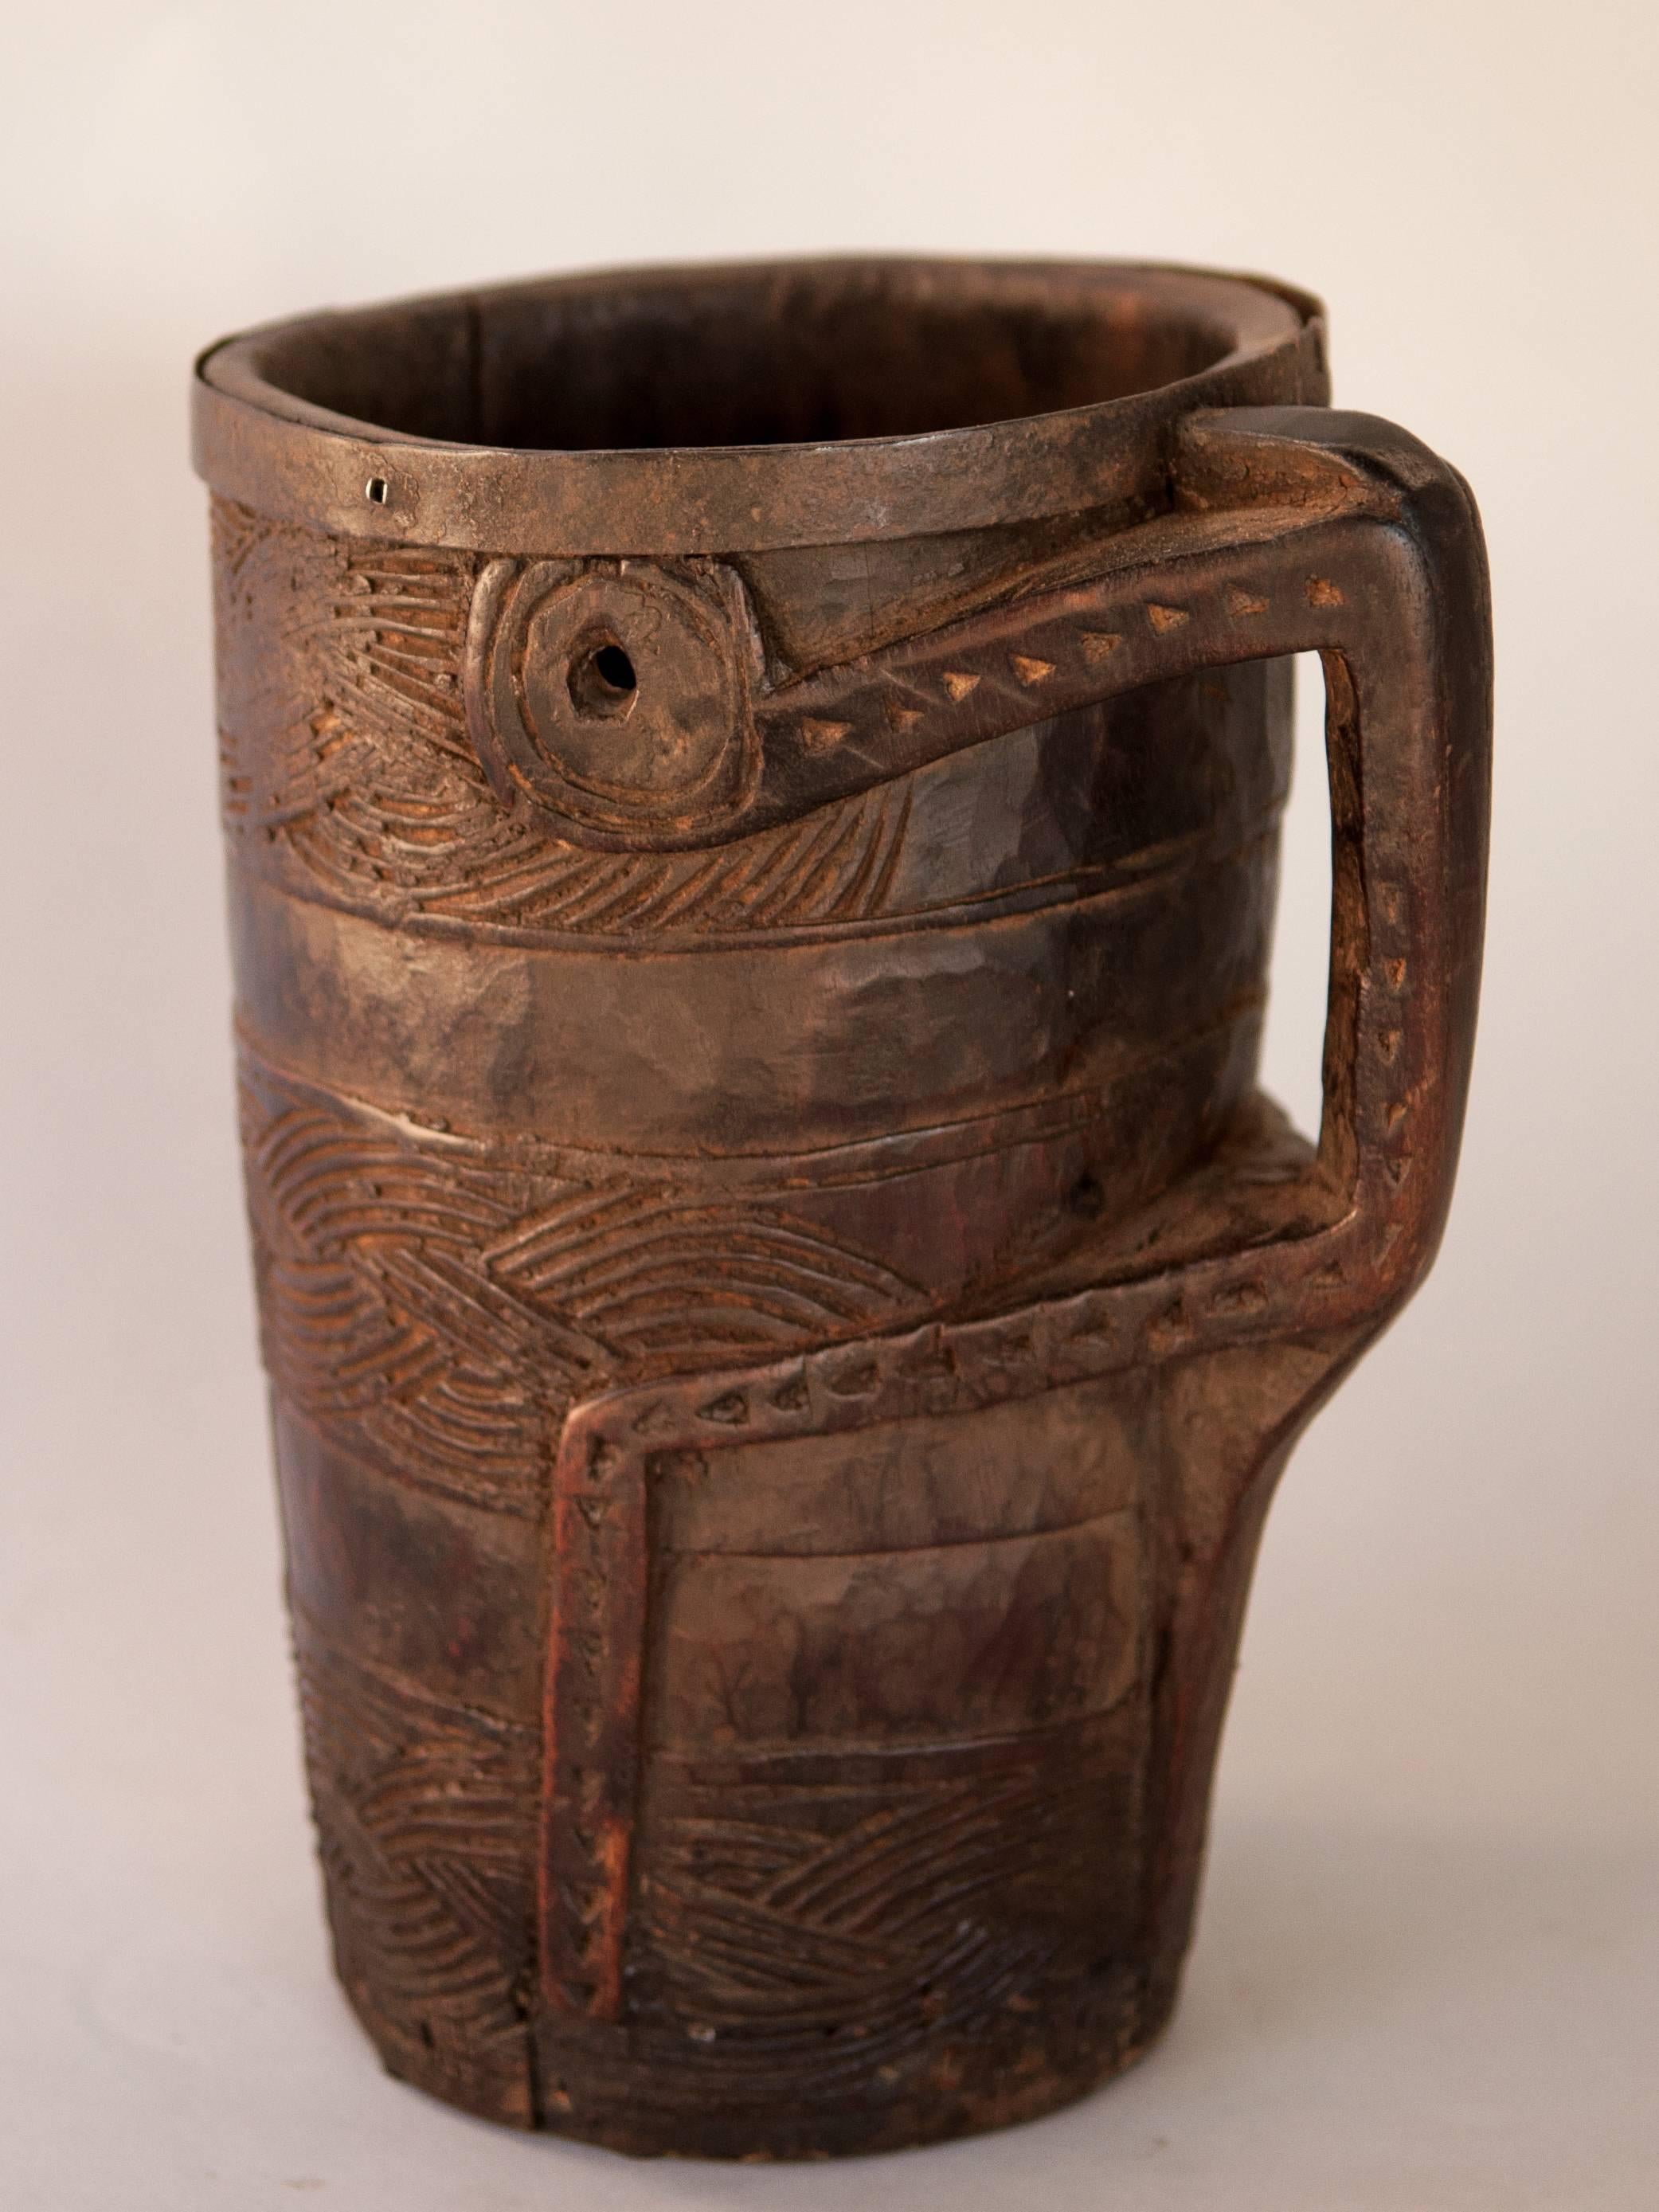 Tribal Wooden Carved Milk Pot with Stylized Monkey Motif. Late 20th Century. West Nepal